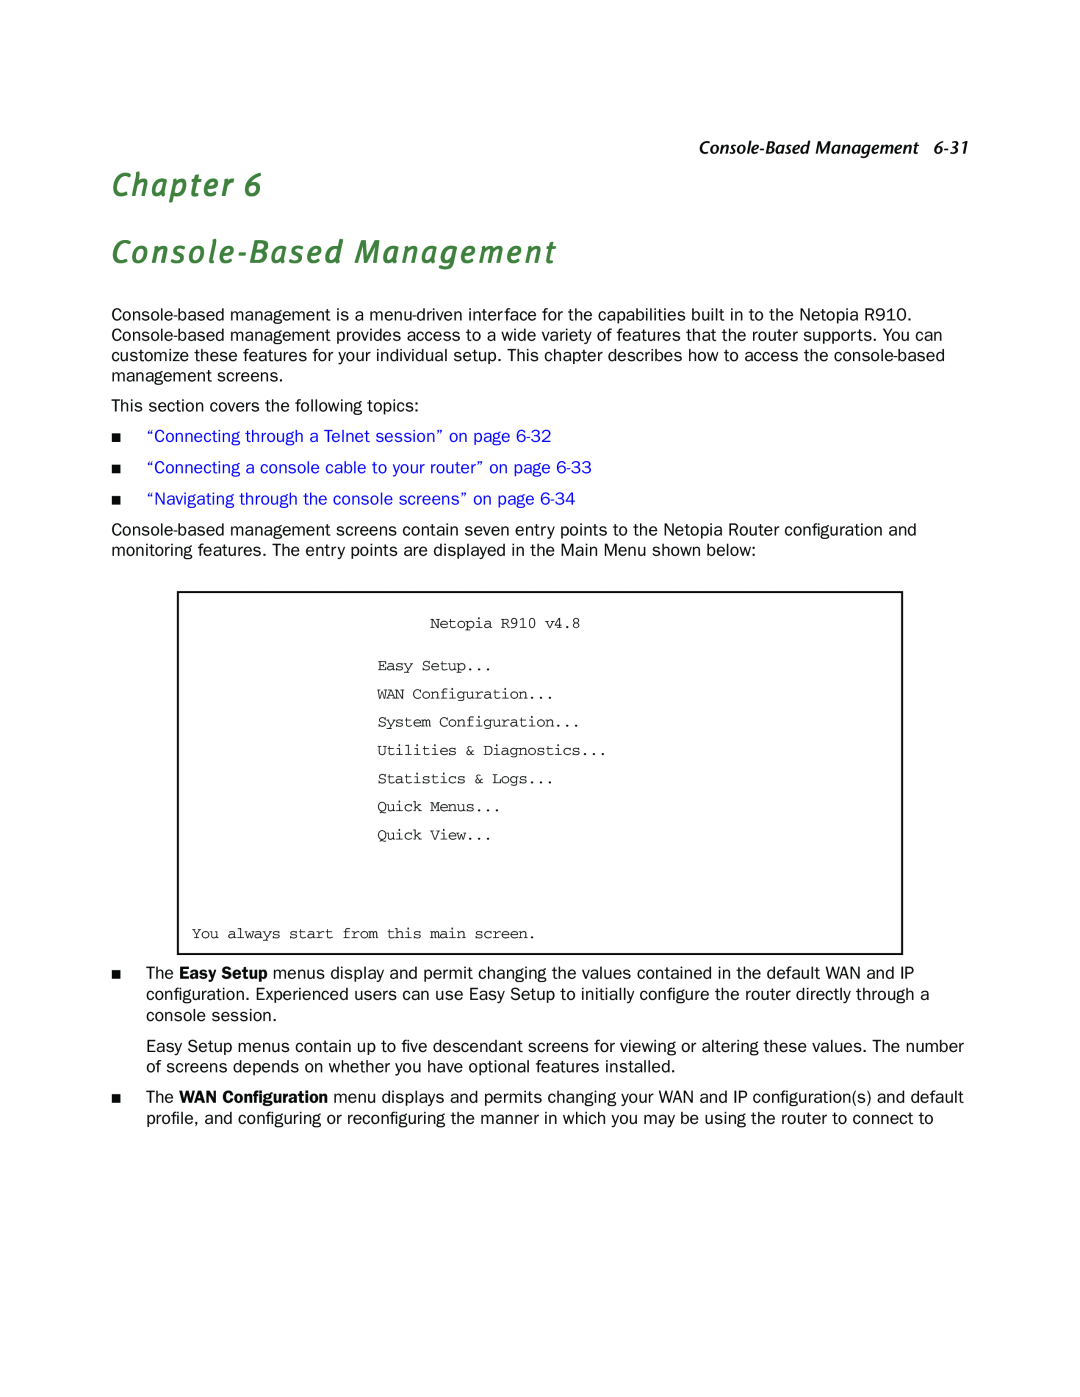 Netopia R910 manual Chapter Console-Based Management, “Connecting through a Telnet session” on page 